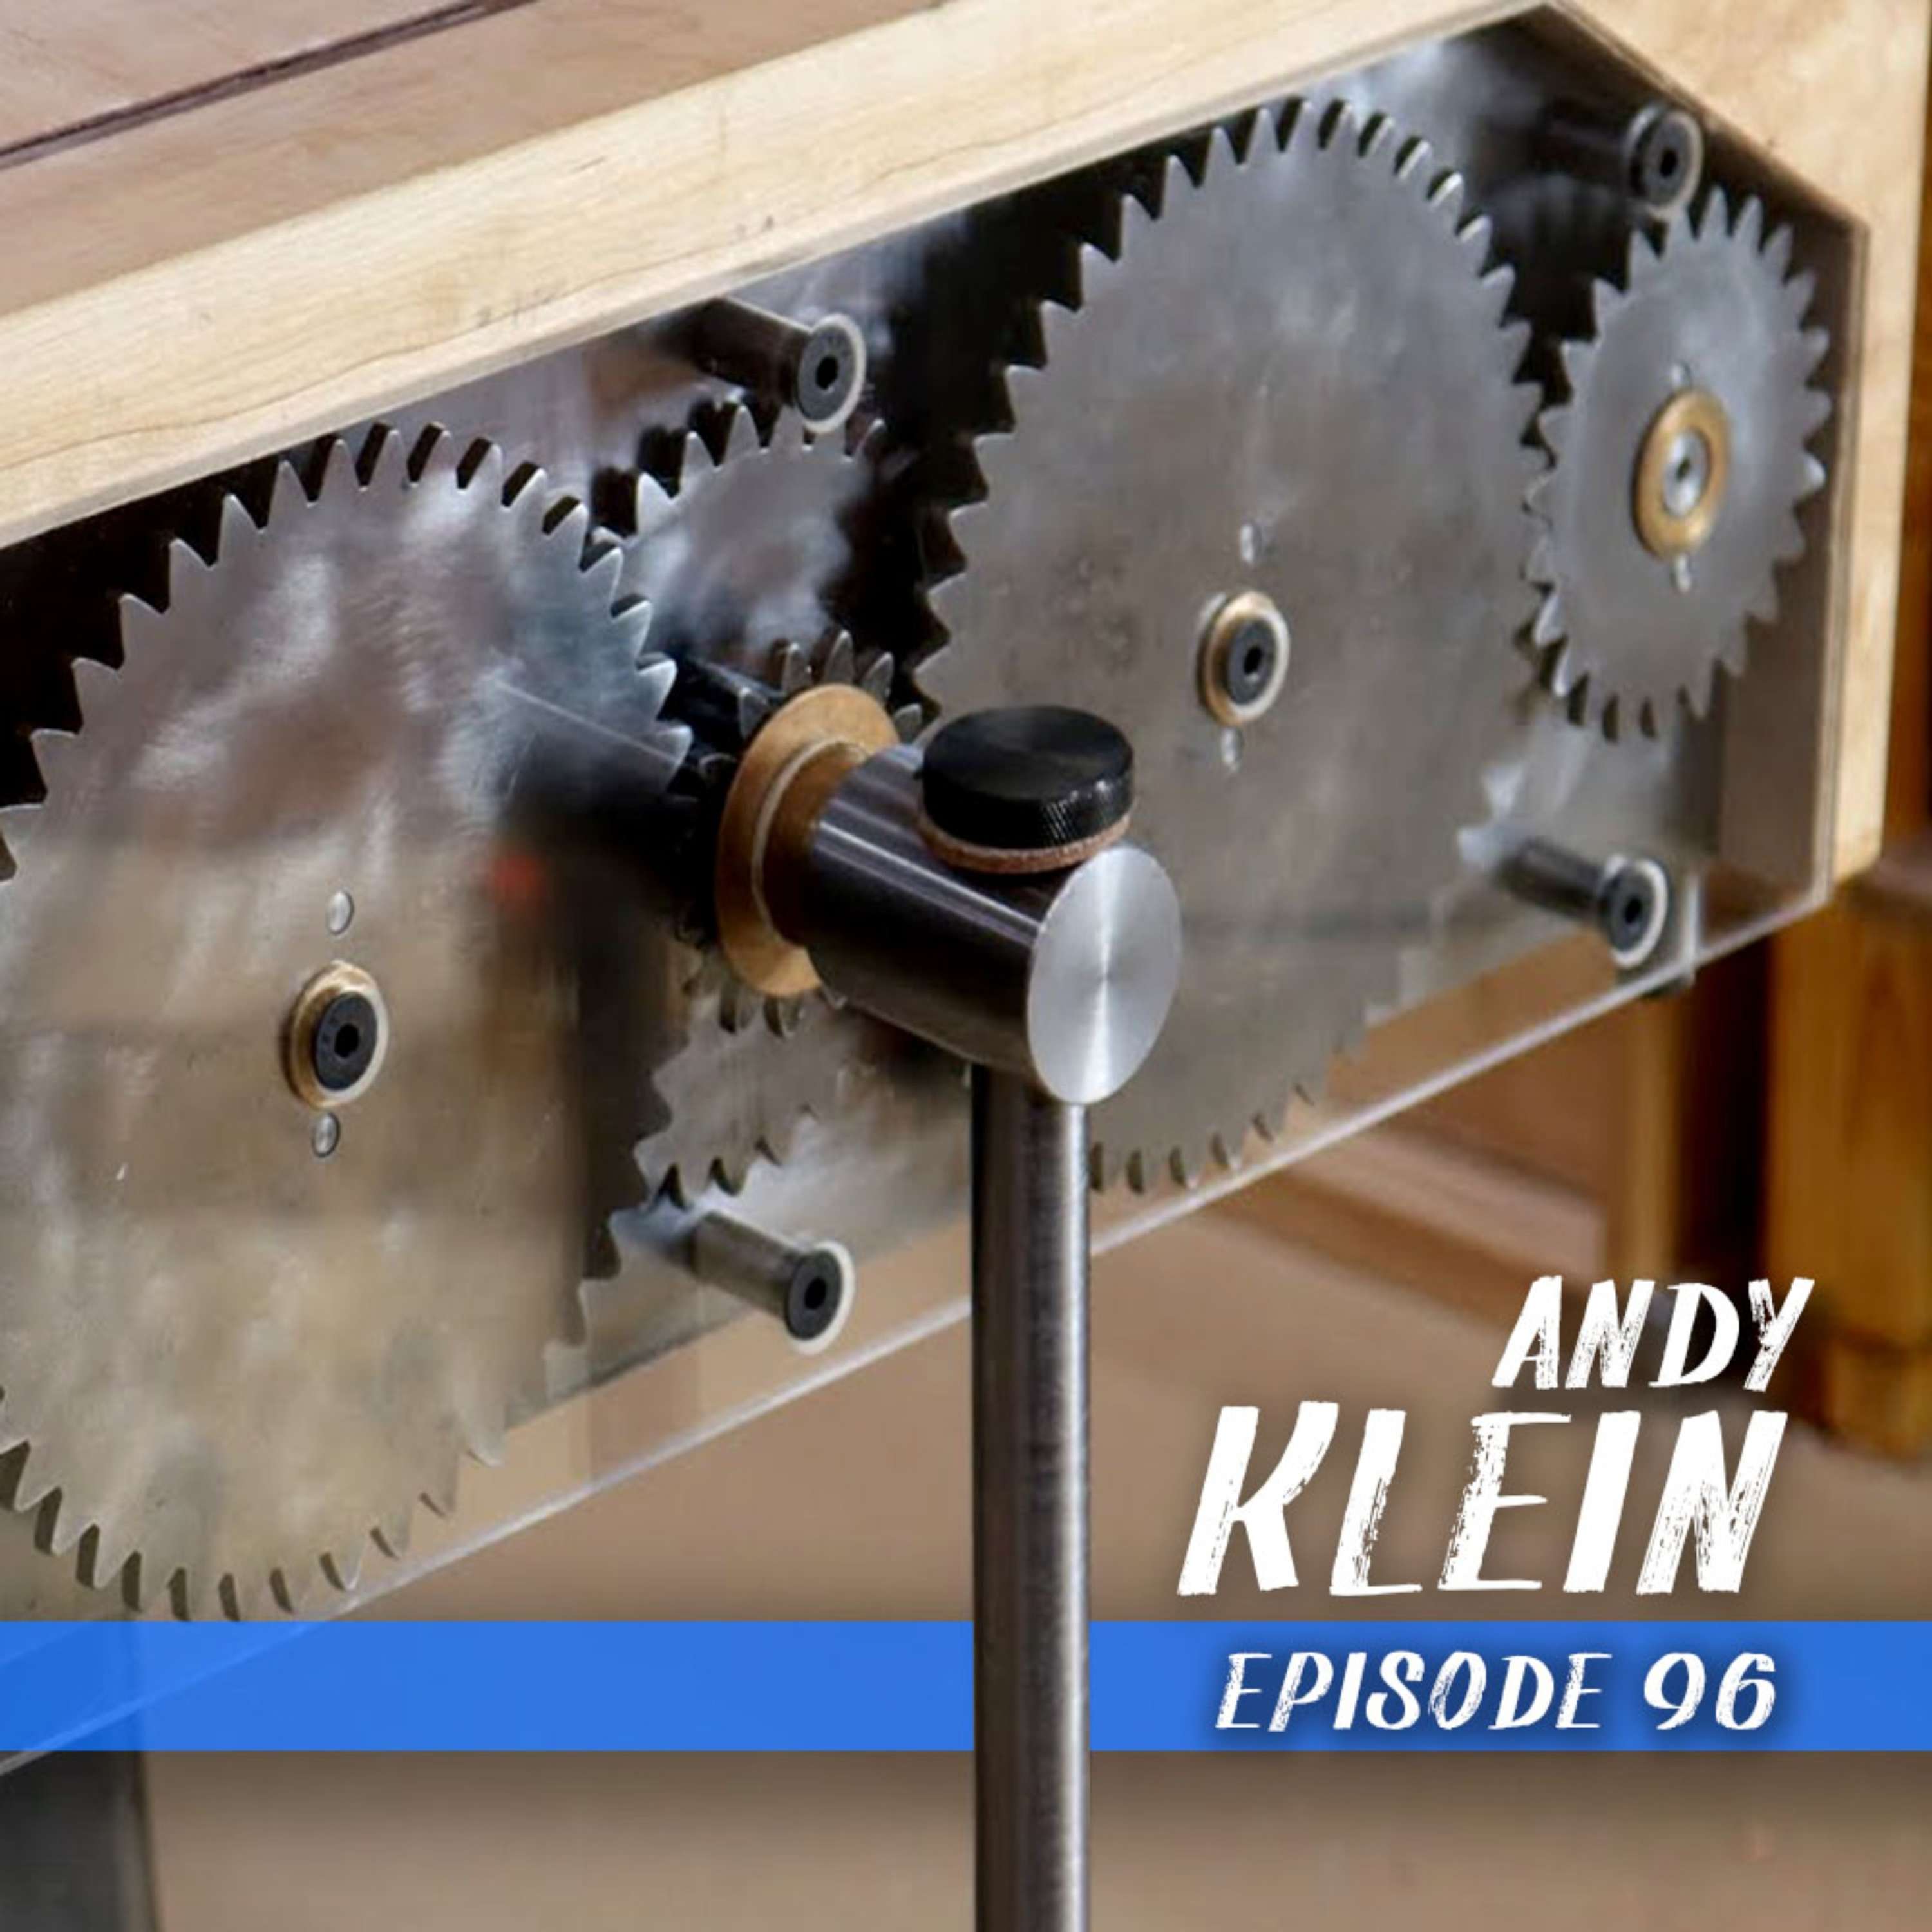 Kickstarter, Indiegogo and Inventing a Better Vise with Andy Klein